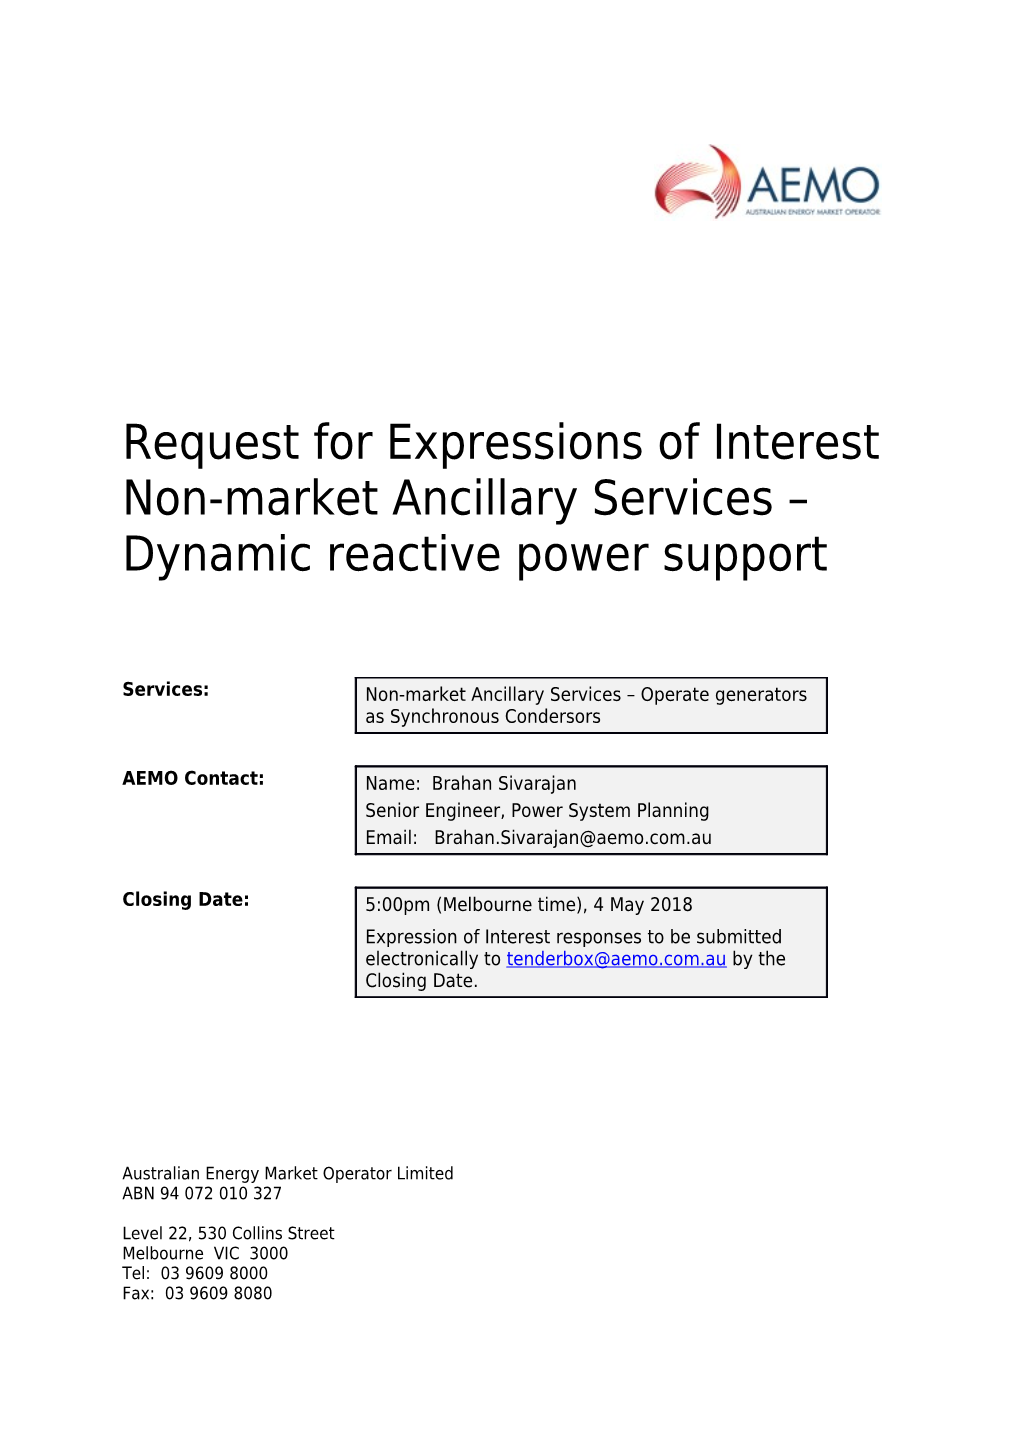 Proforma Request for Expressions of Interest